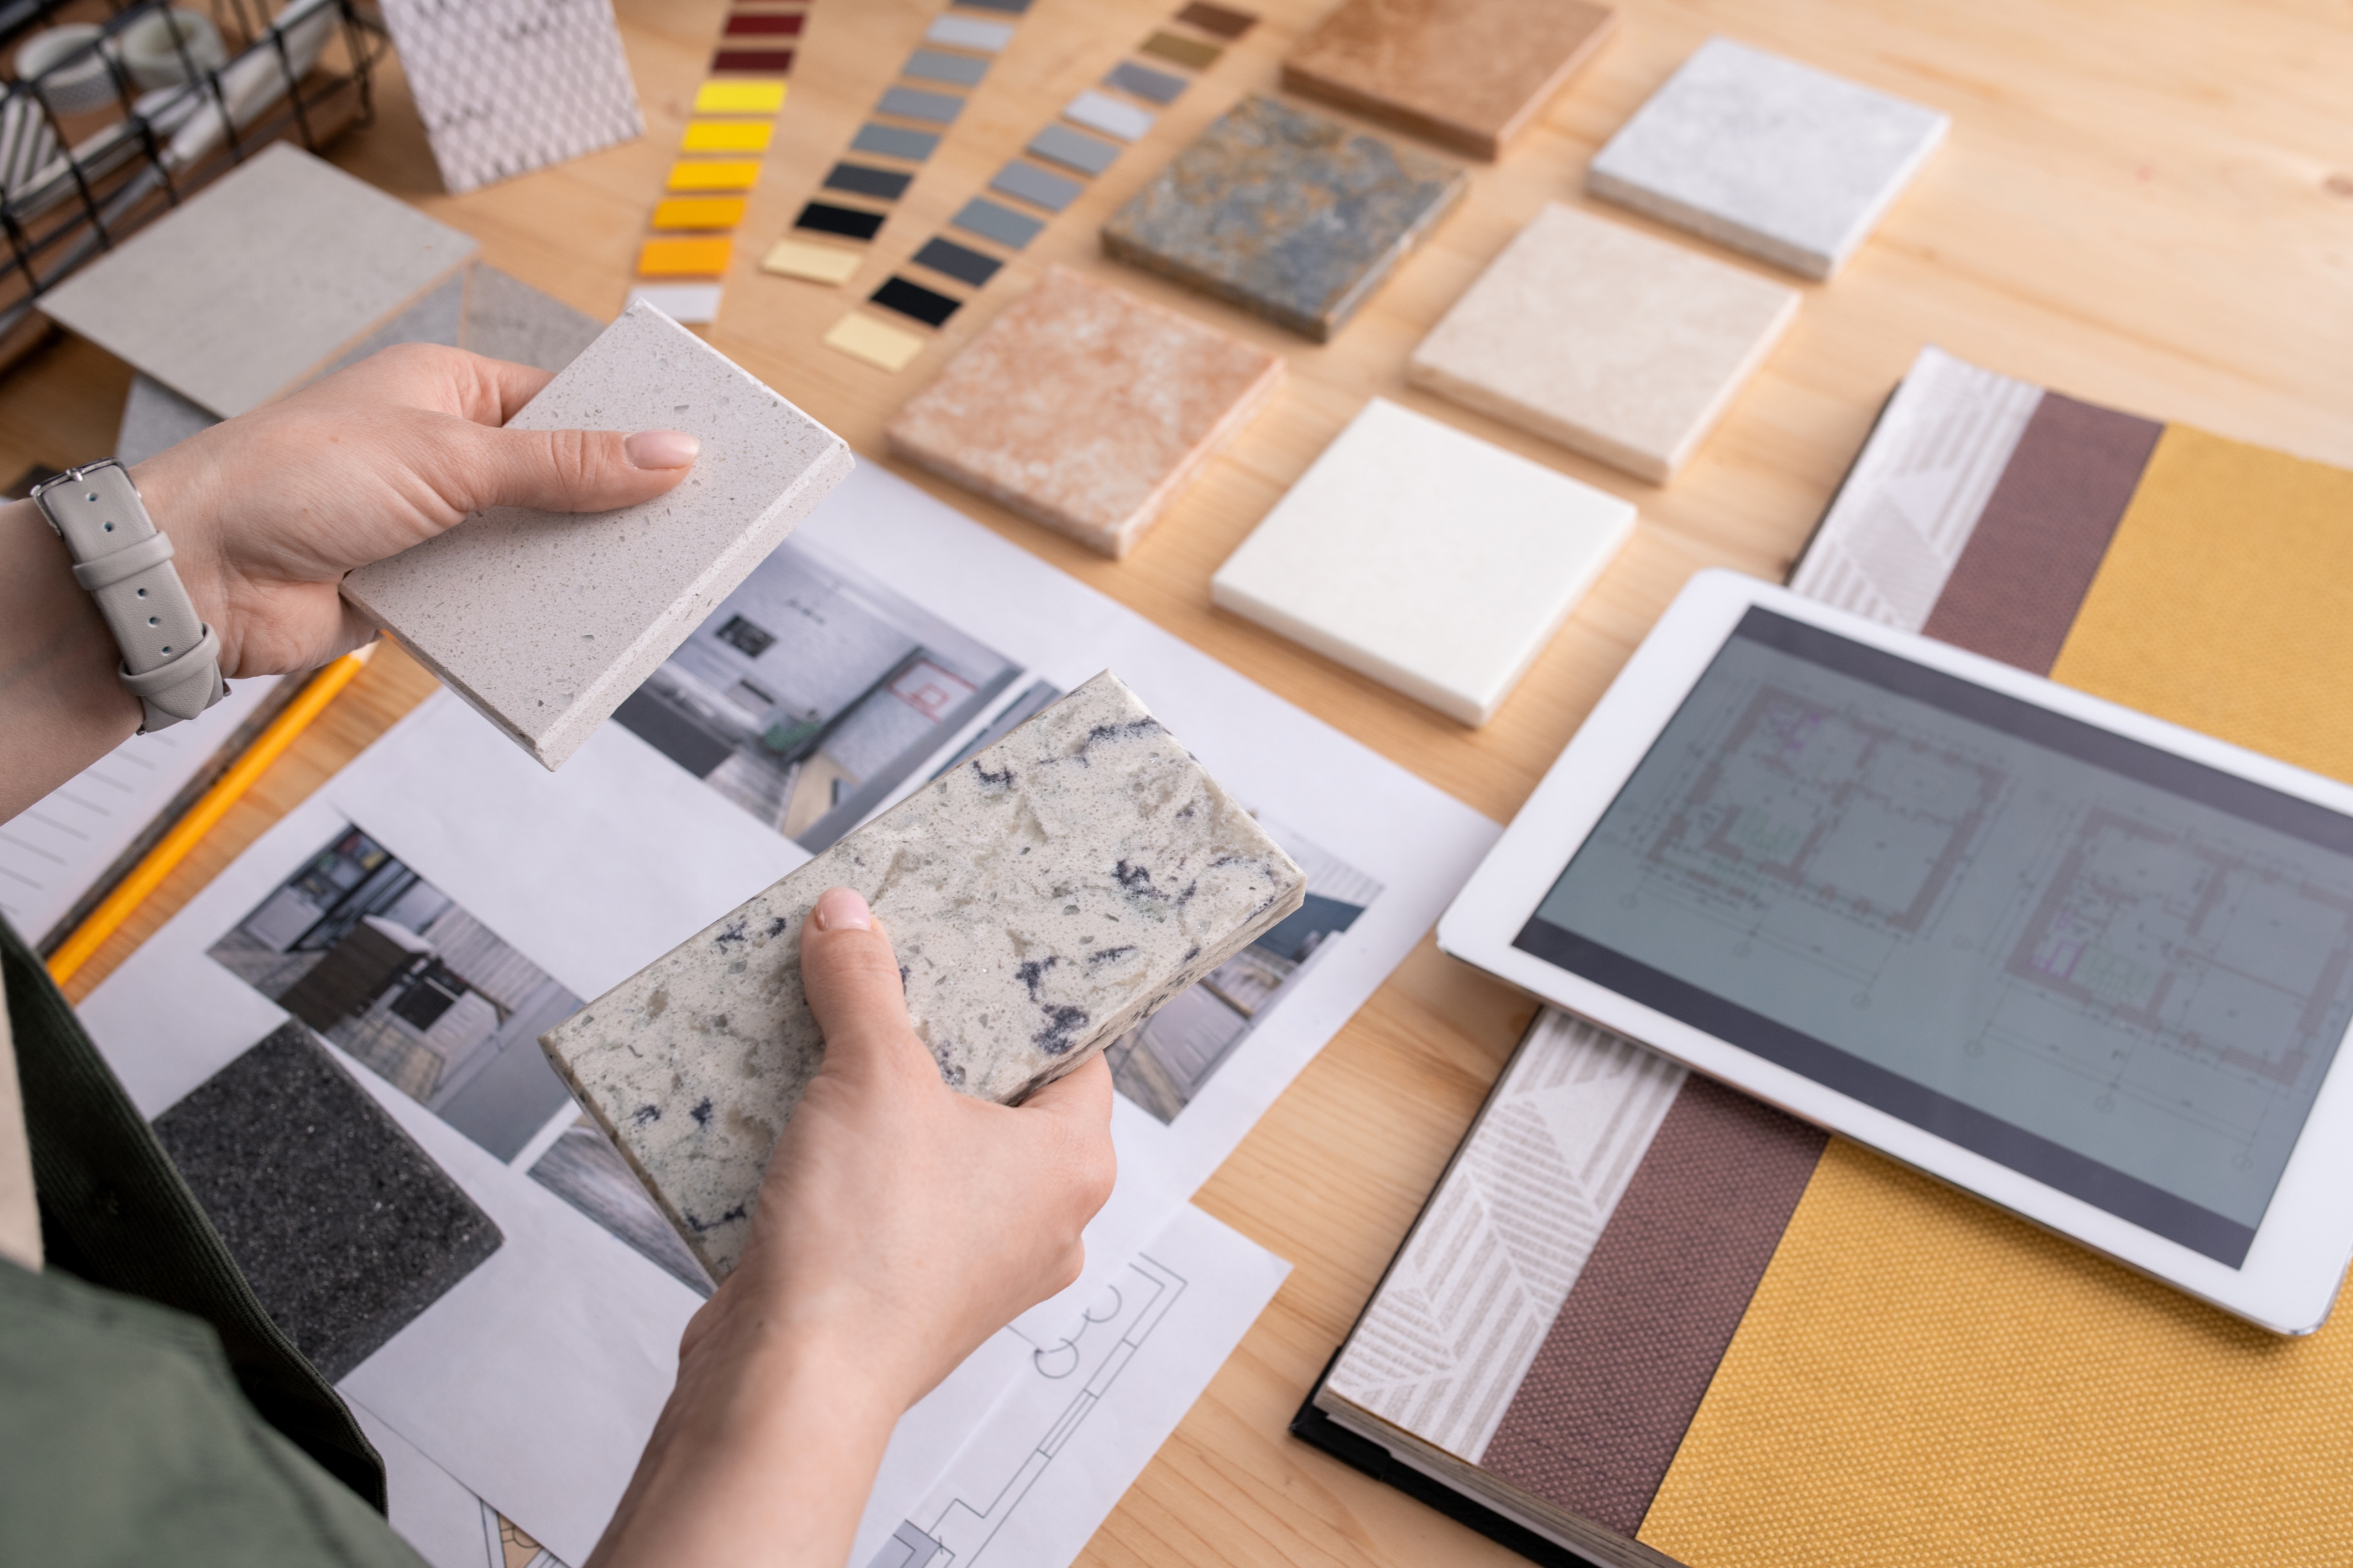 5 Key Skills That Are Required as an Interior Designer